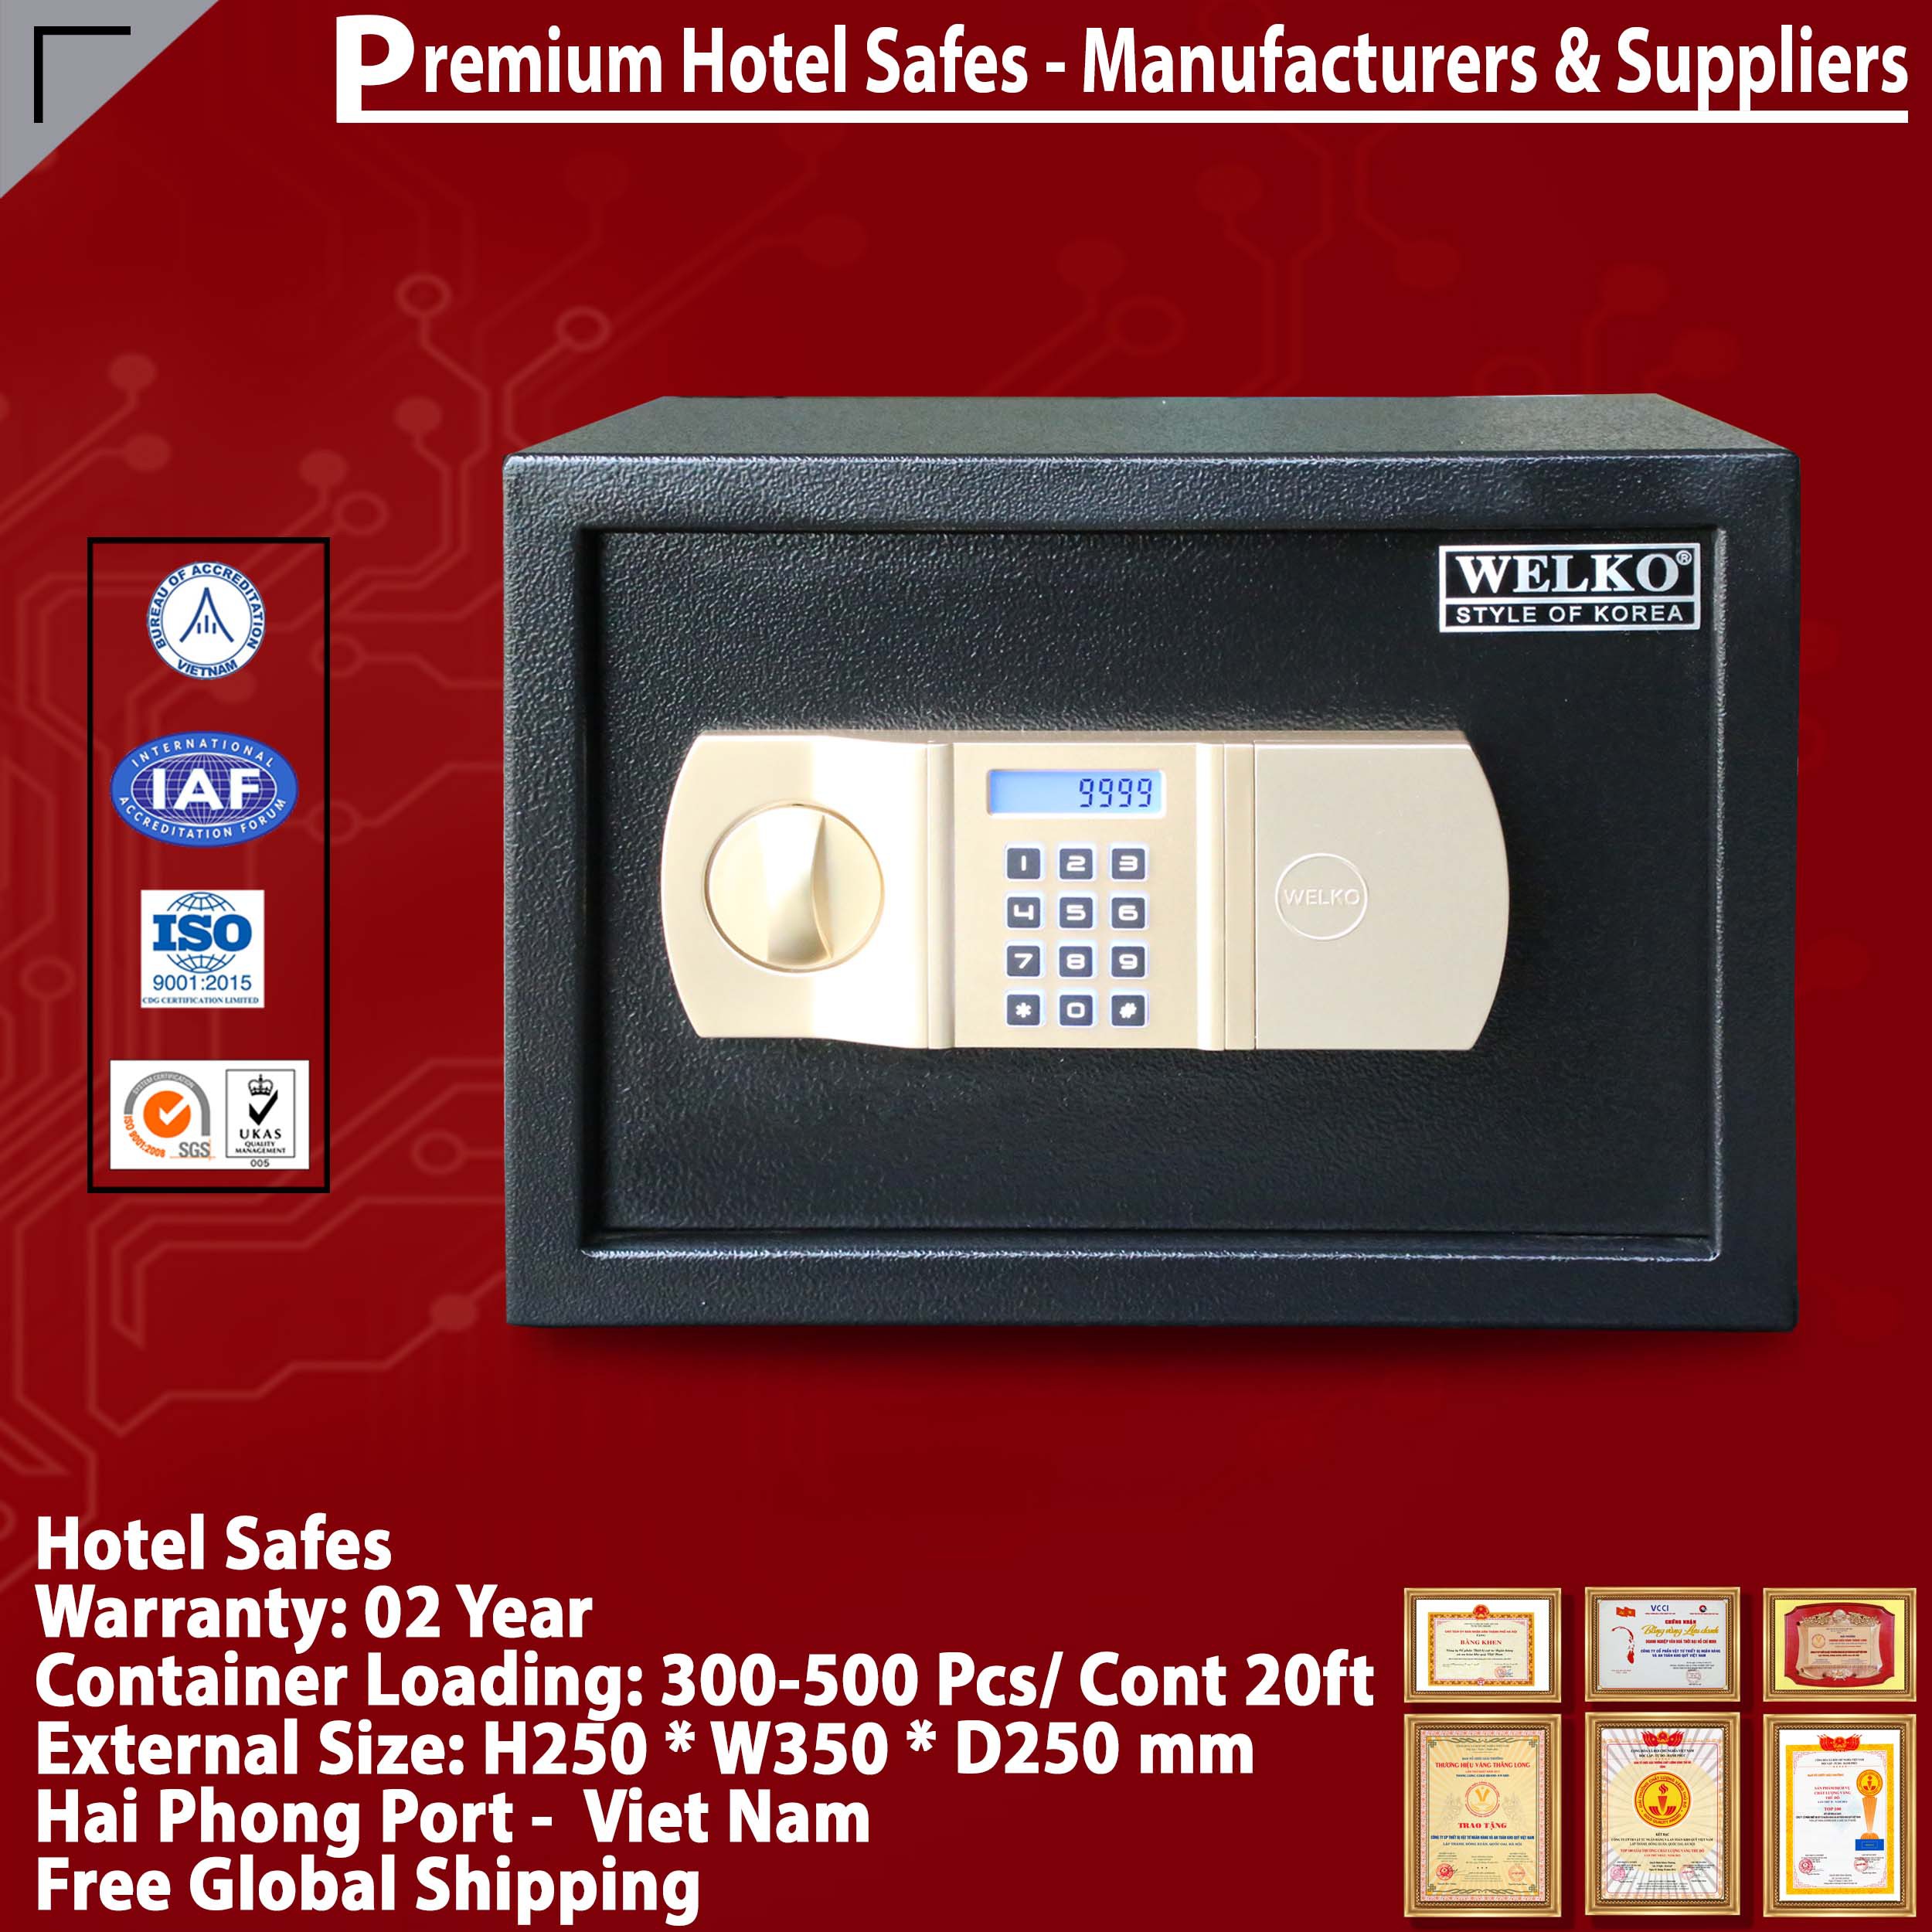 Hotel Safety Deposit Box Factory Direct & Fast Shipping‎